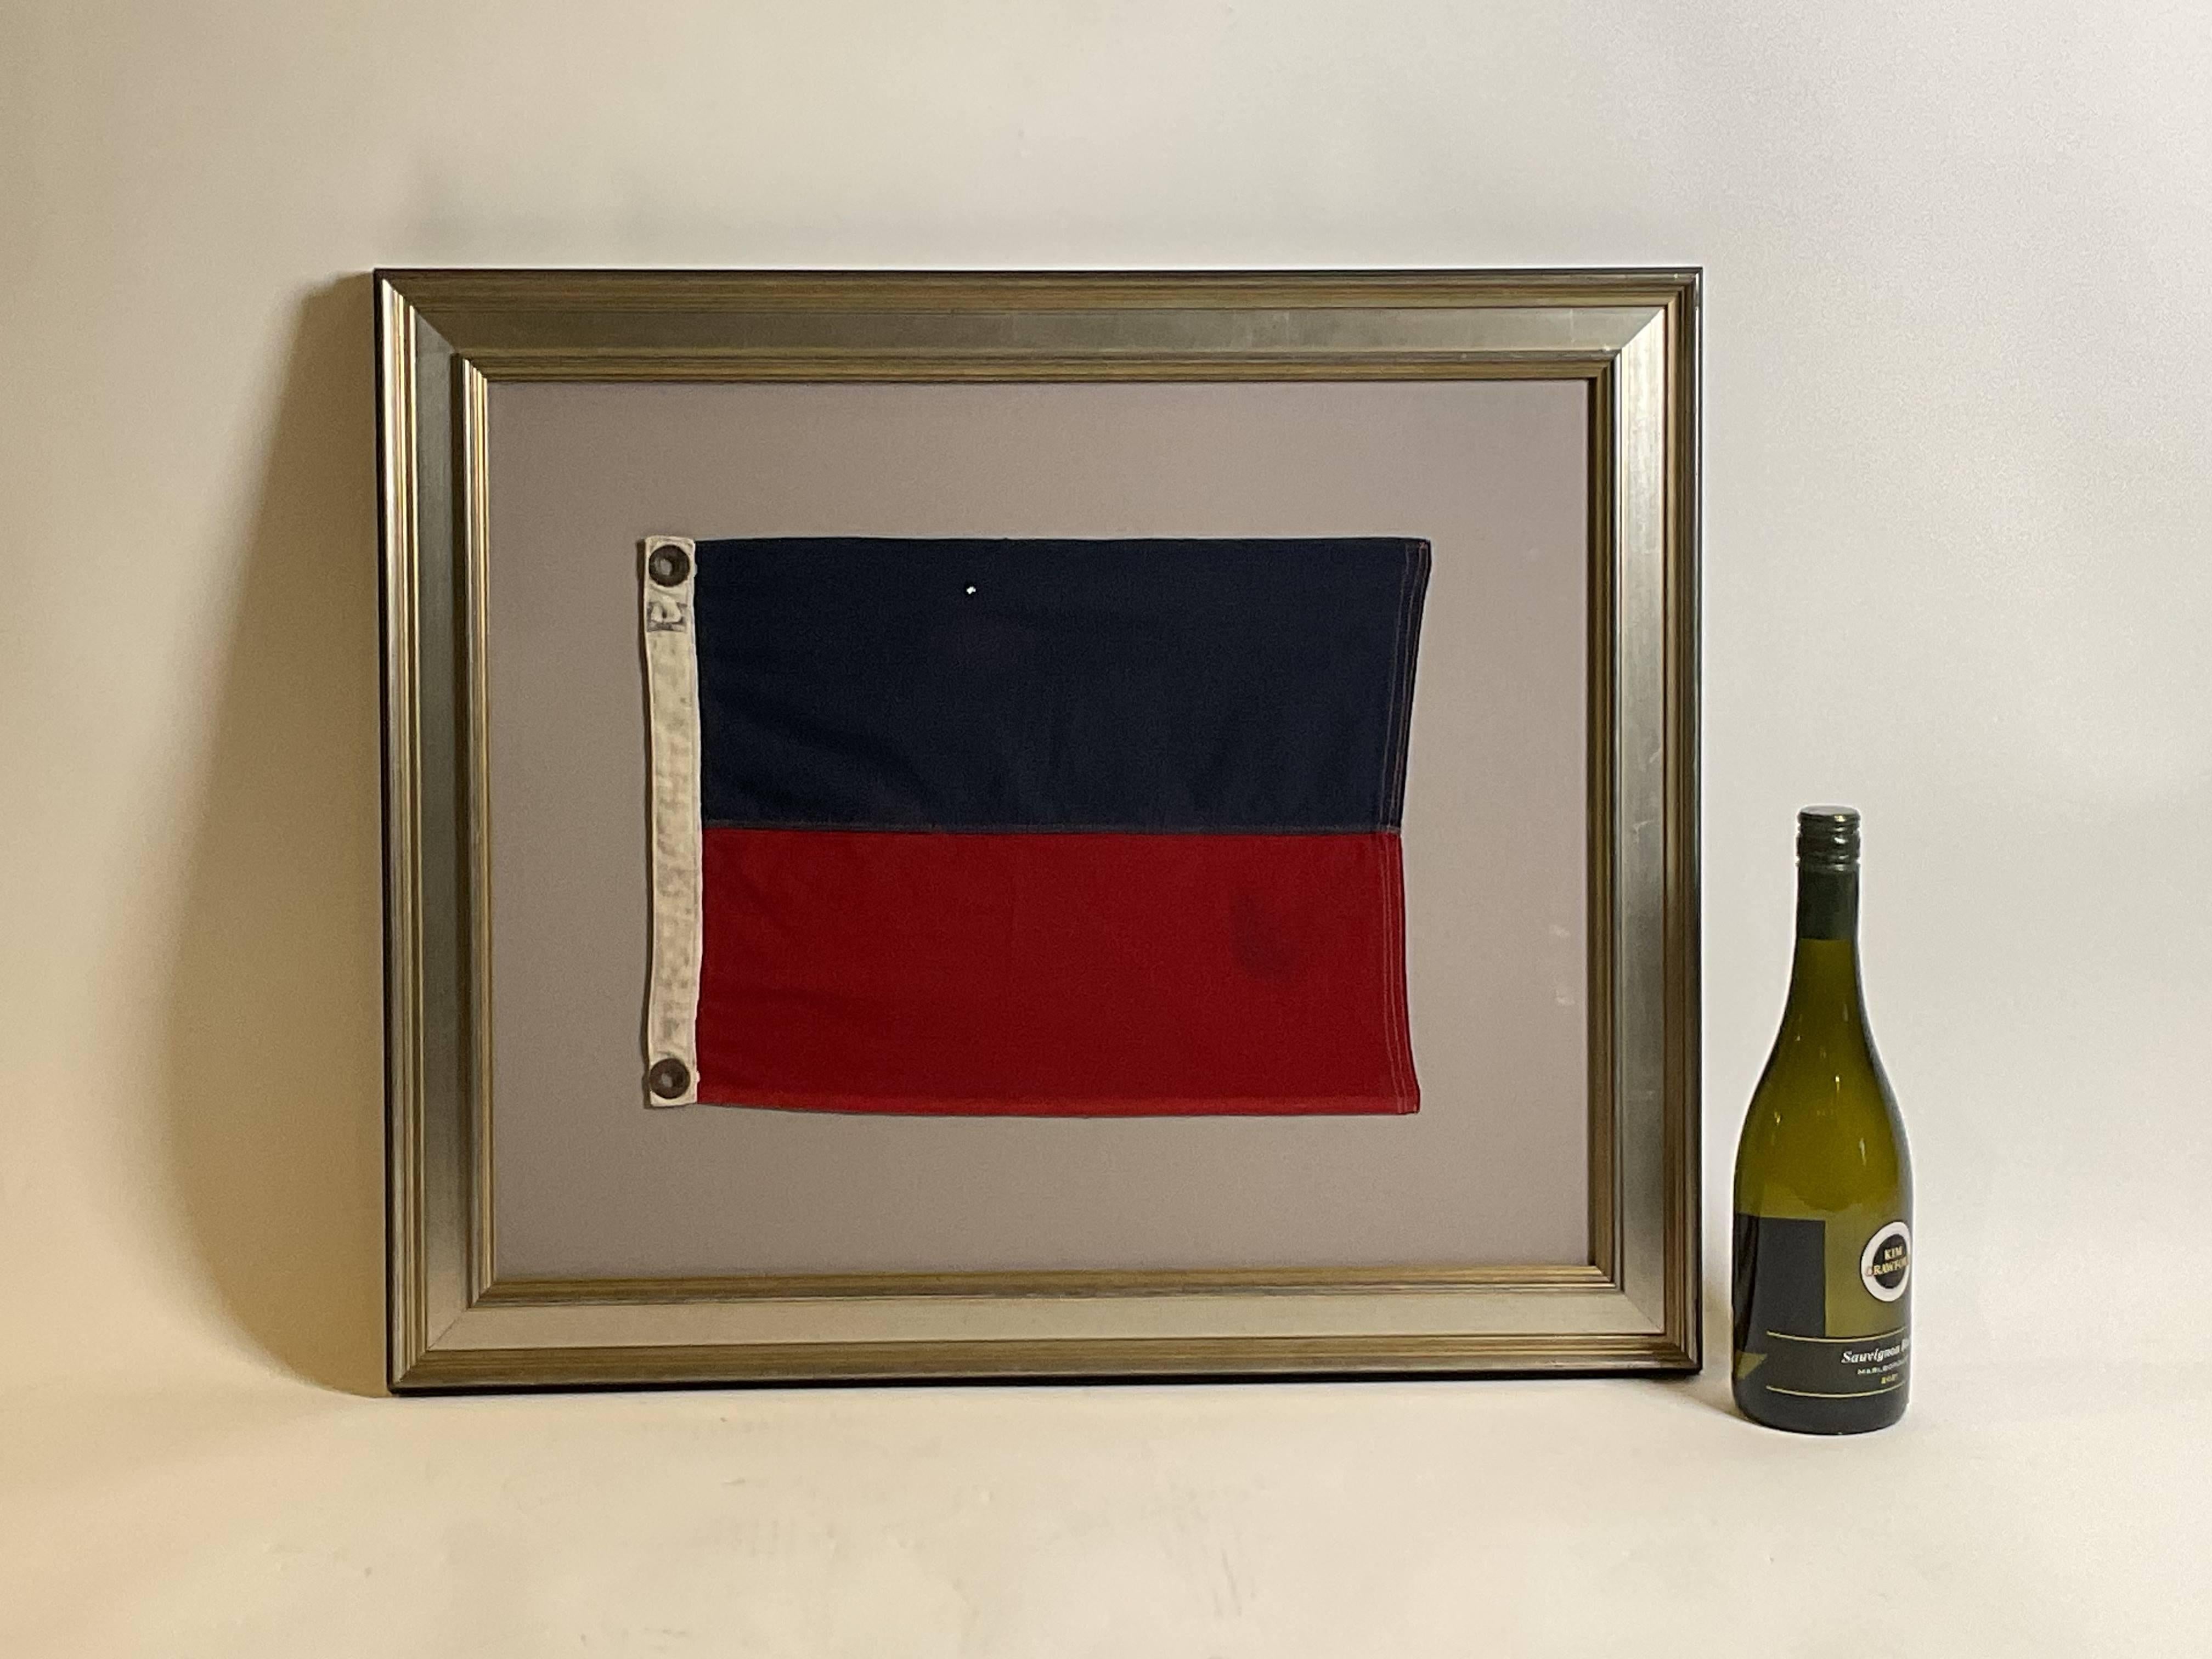 Vintage maritime signal flag signifying letter “E”, echo. Stitched in panels of red and blue. Canvas hoist with brass grommets and the letter “E” in black ink, set into a custom frame.

Weight: 6 lbs.
Overall Dimensions: 22